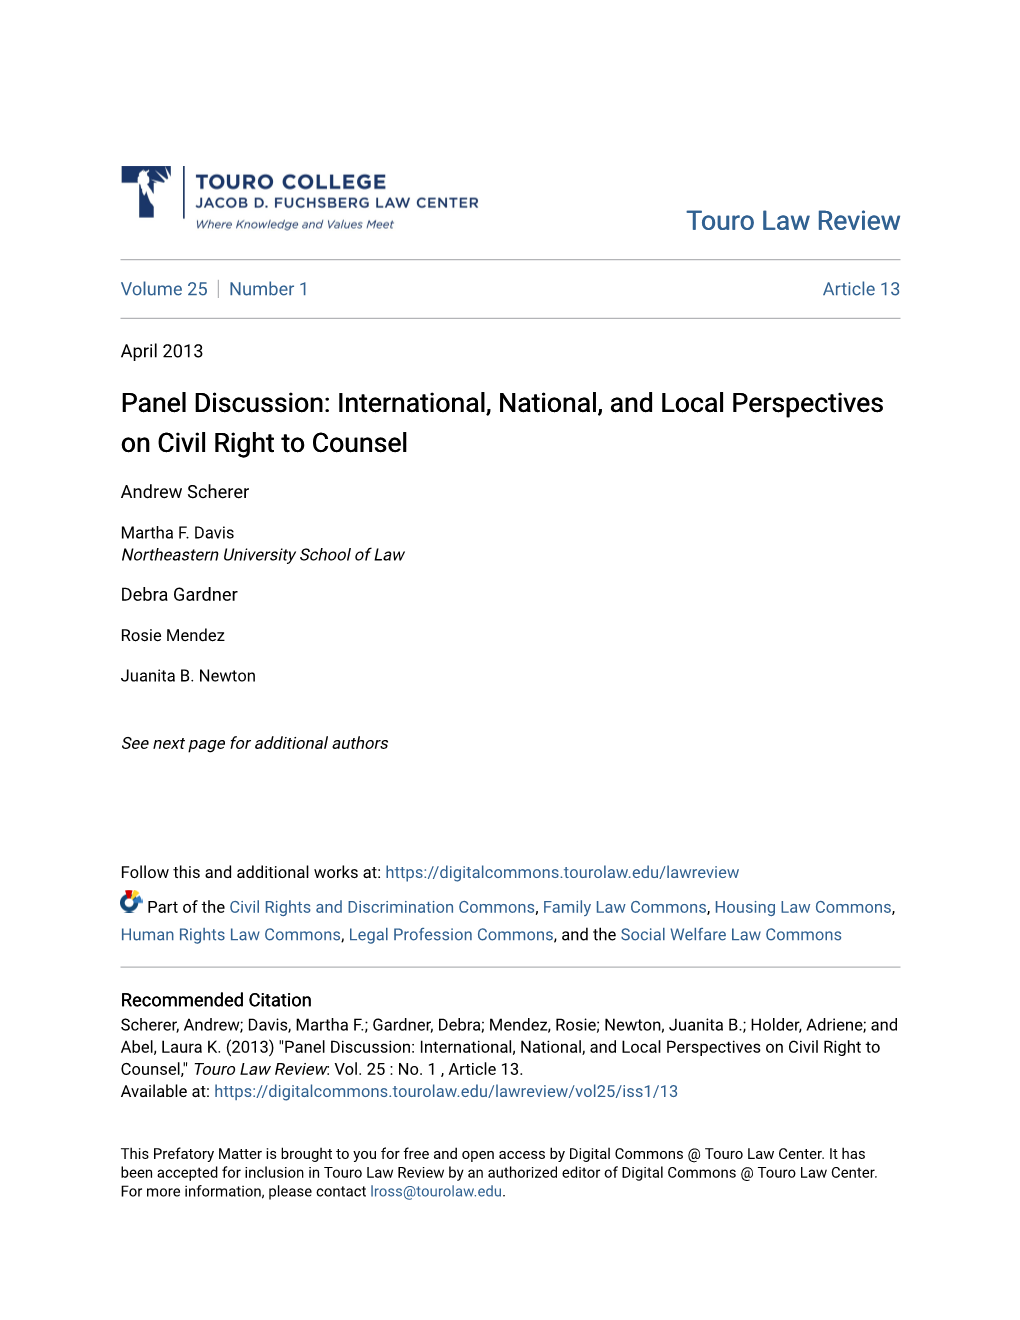 Panel Discussion: International, National, and Local Perspectives on Civil Right to Counsel